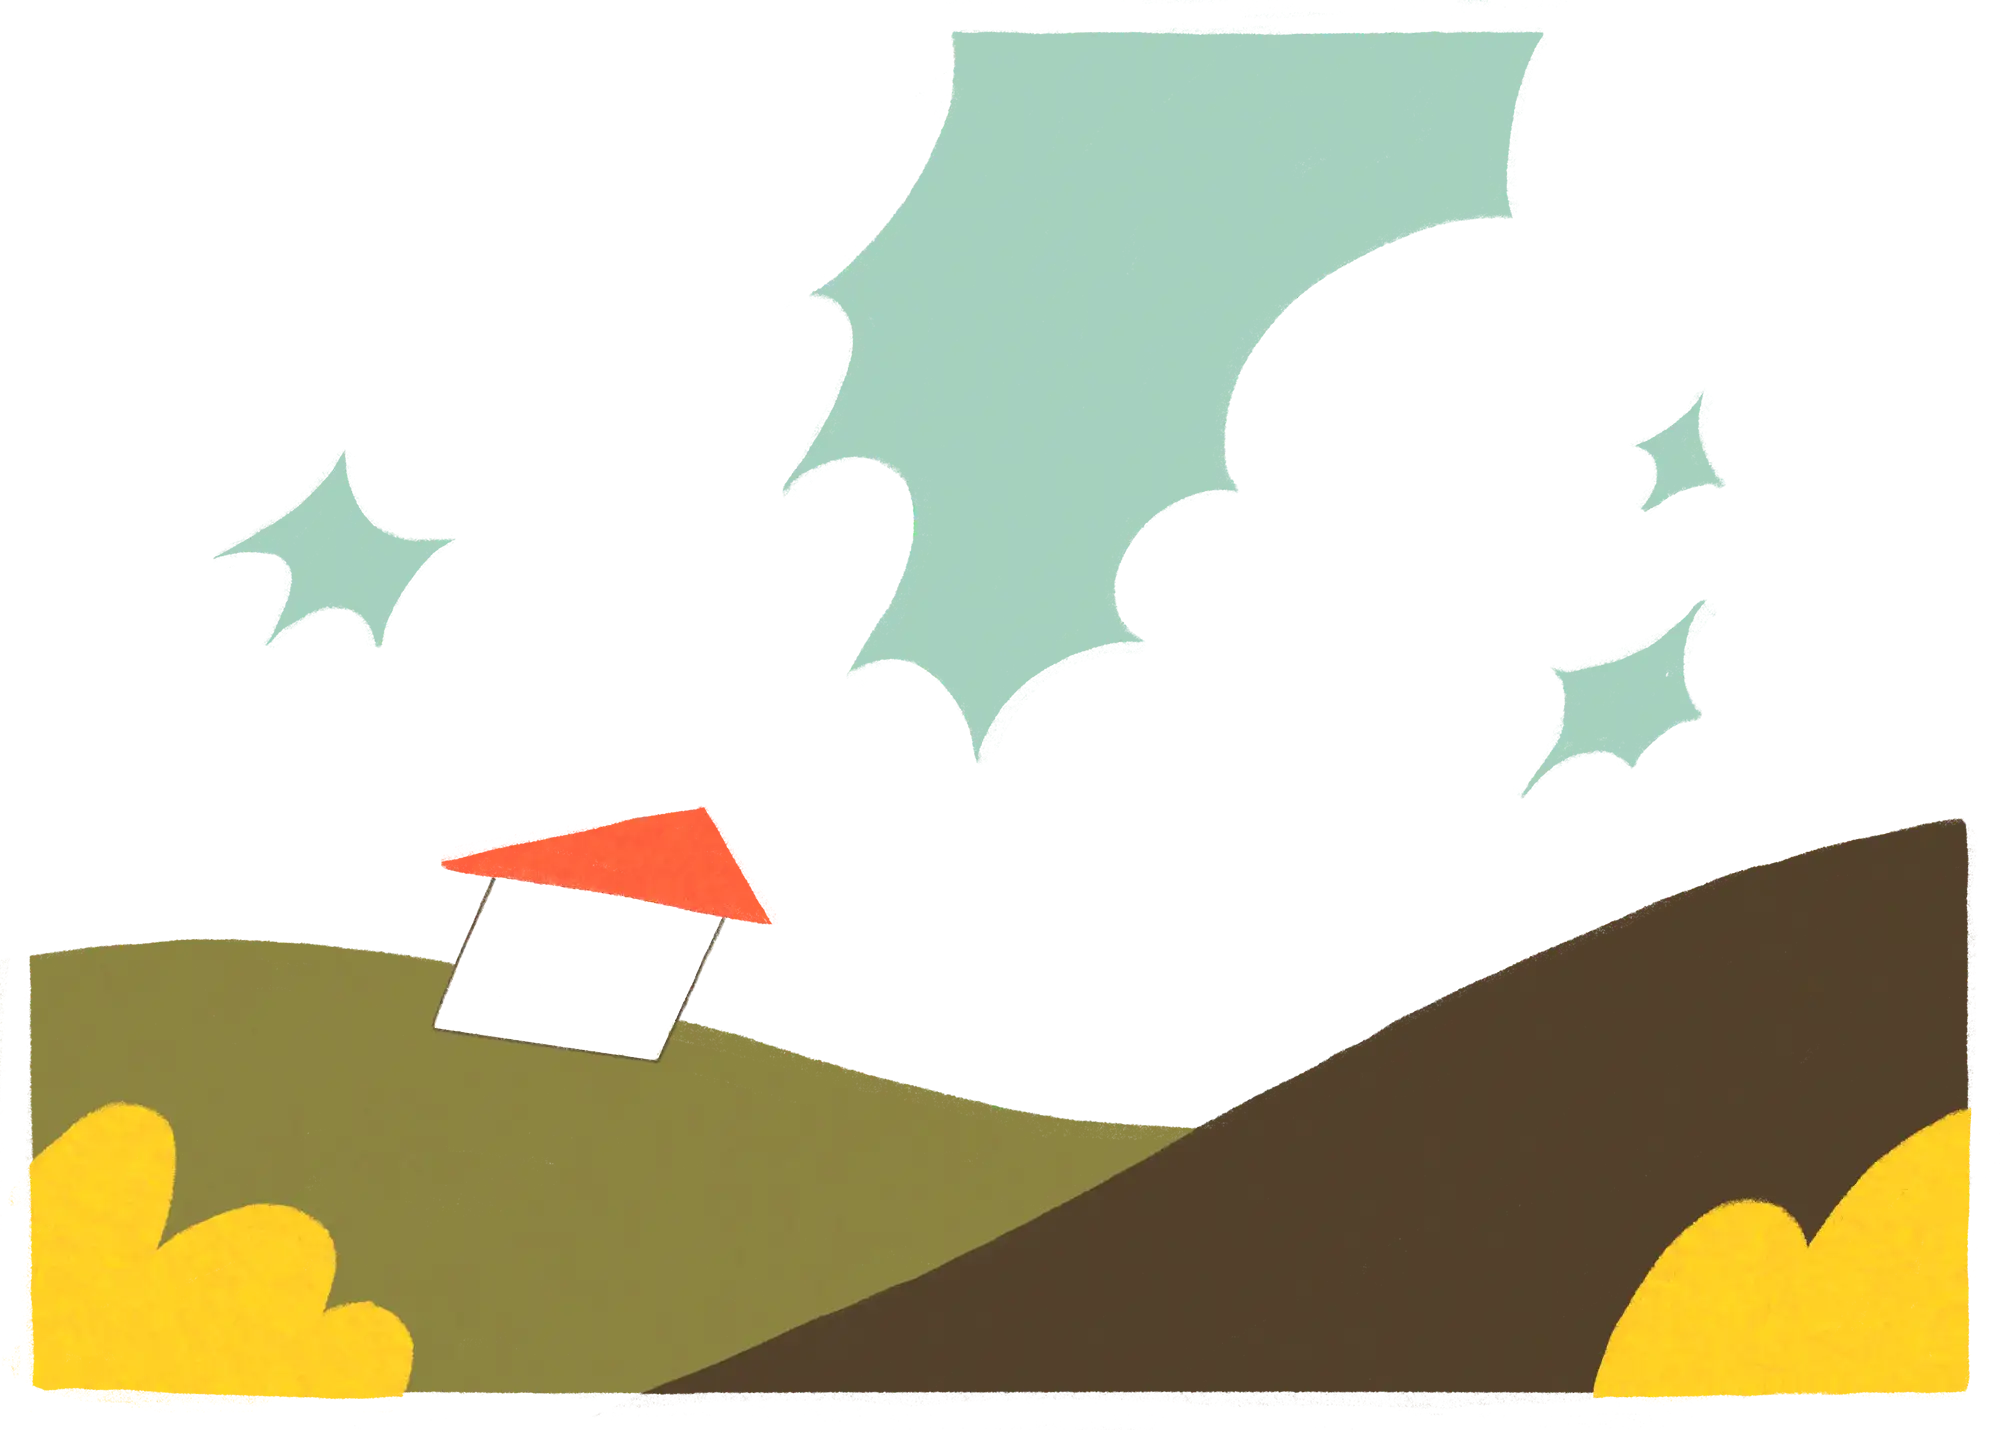 A drawing of rolling hills, clouds, and a little house